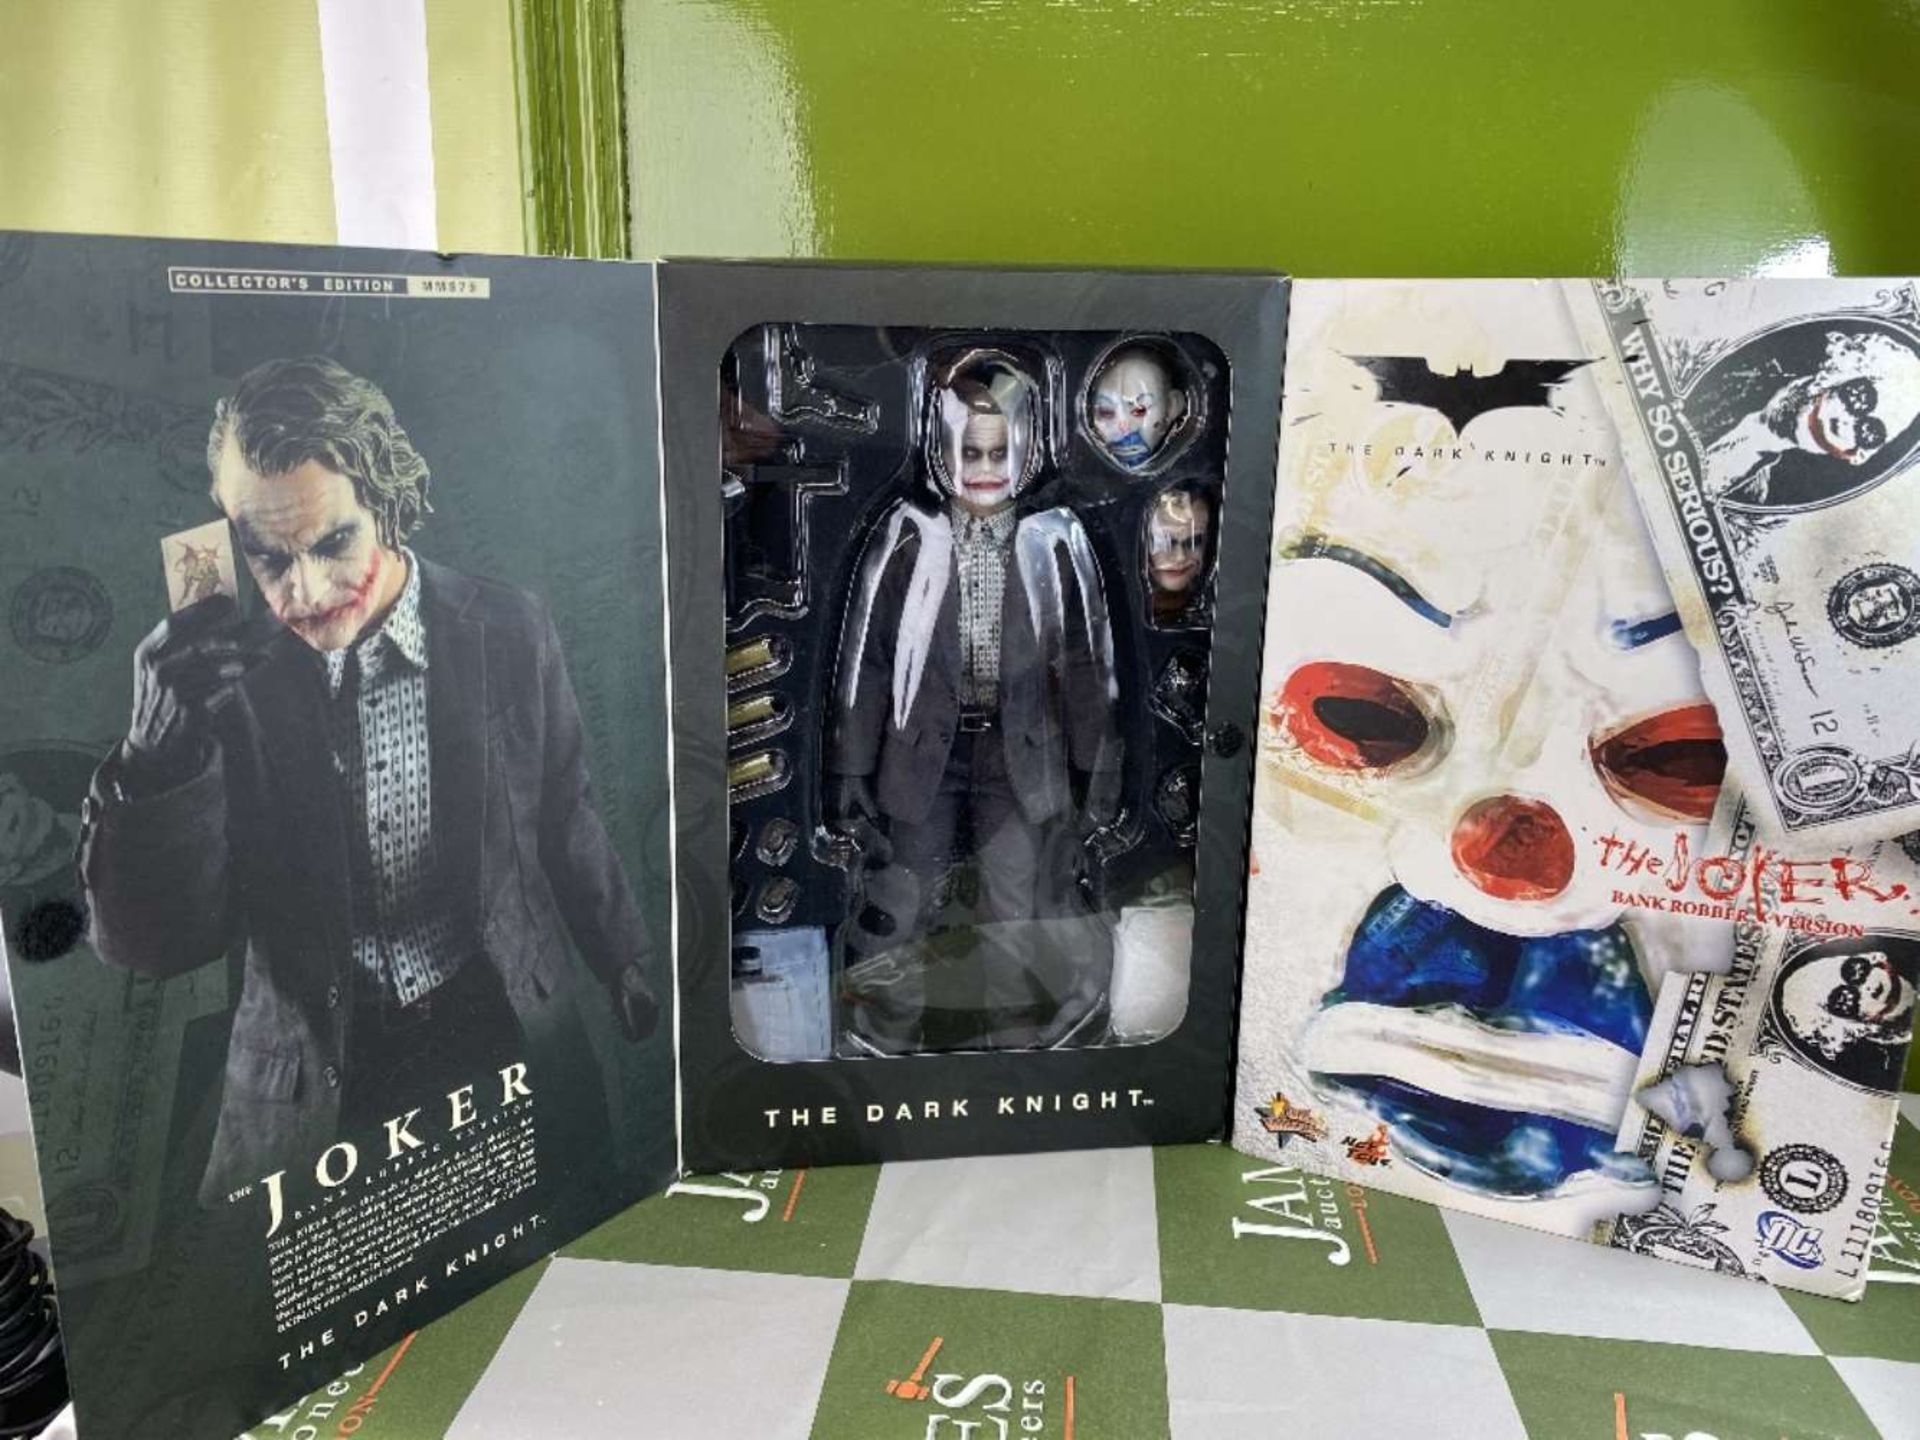 Hot Toys "The Joker" Bank Robber Edition 1/6 Scale Figure - Image 2 of 6